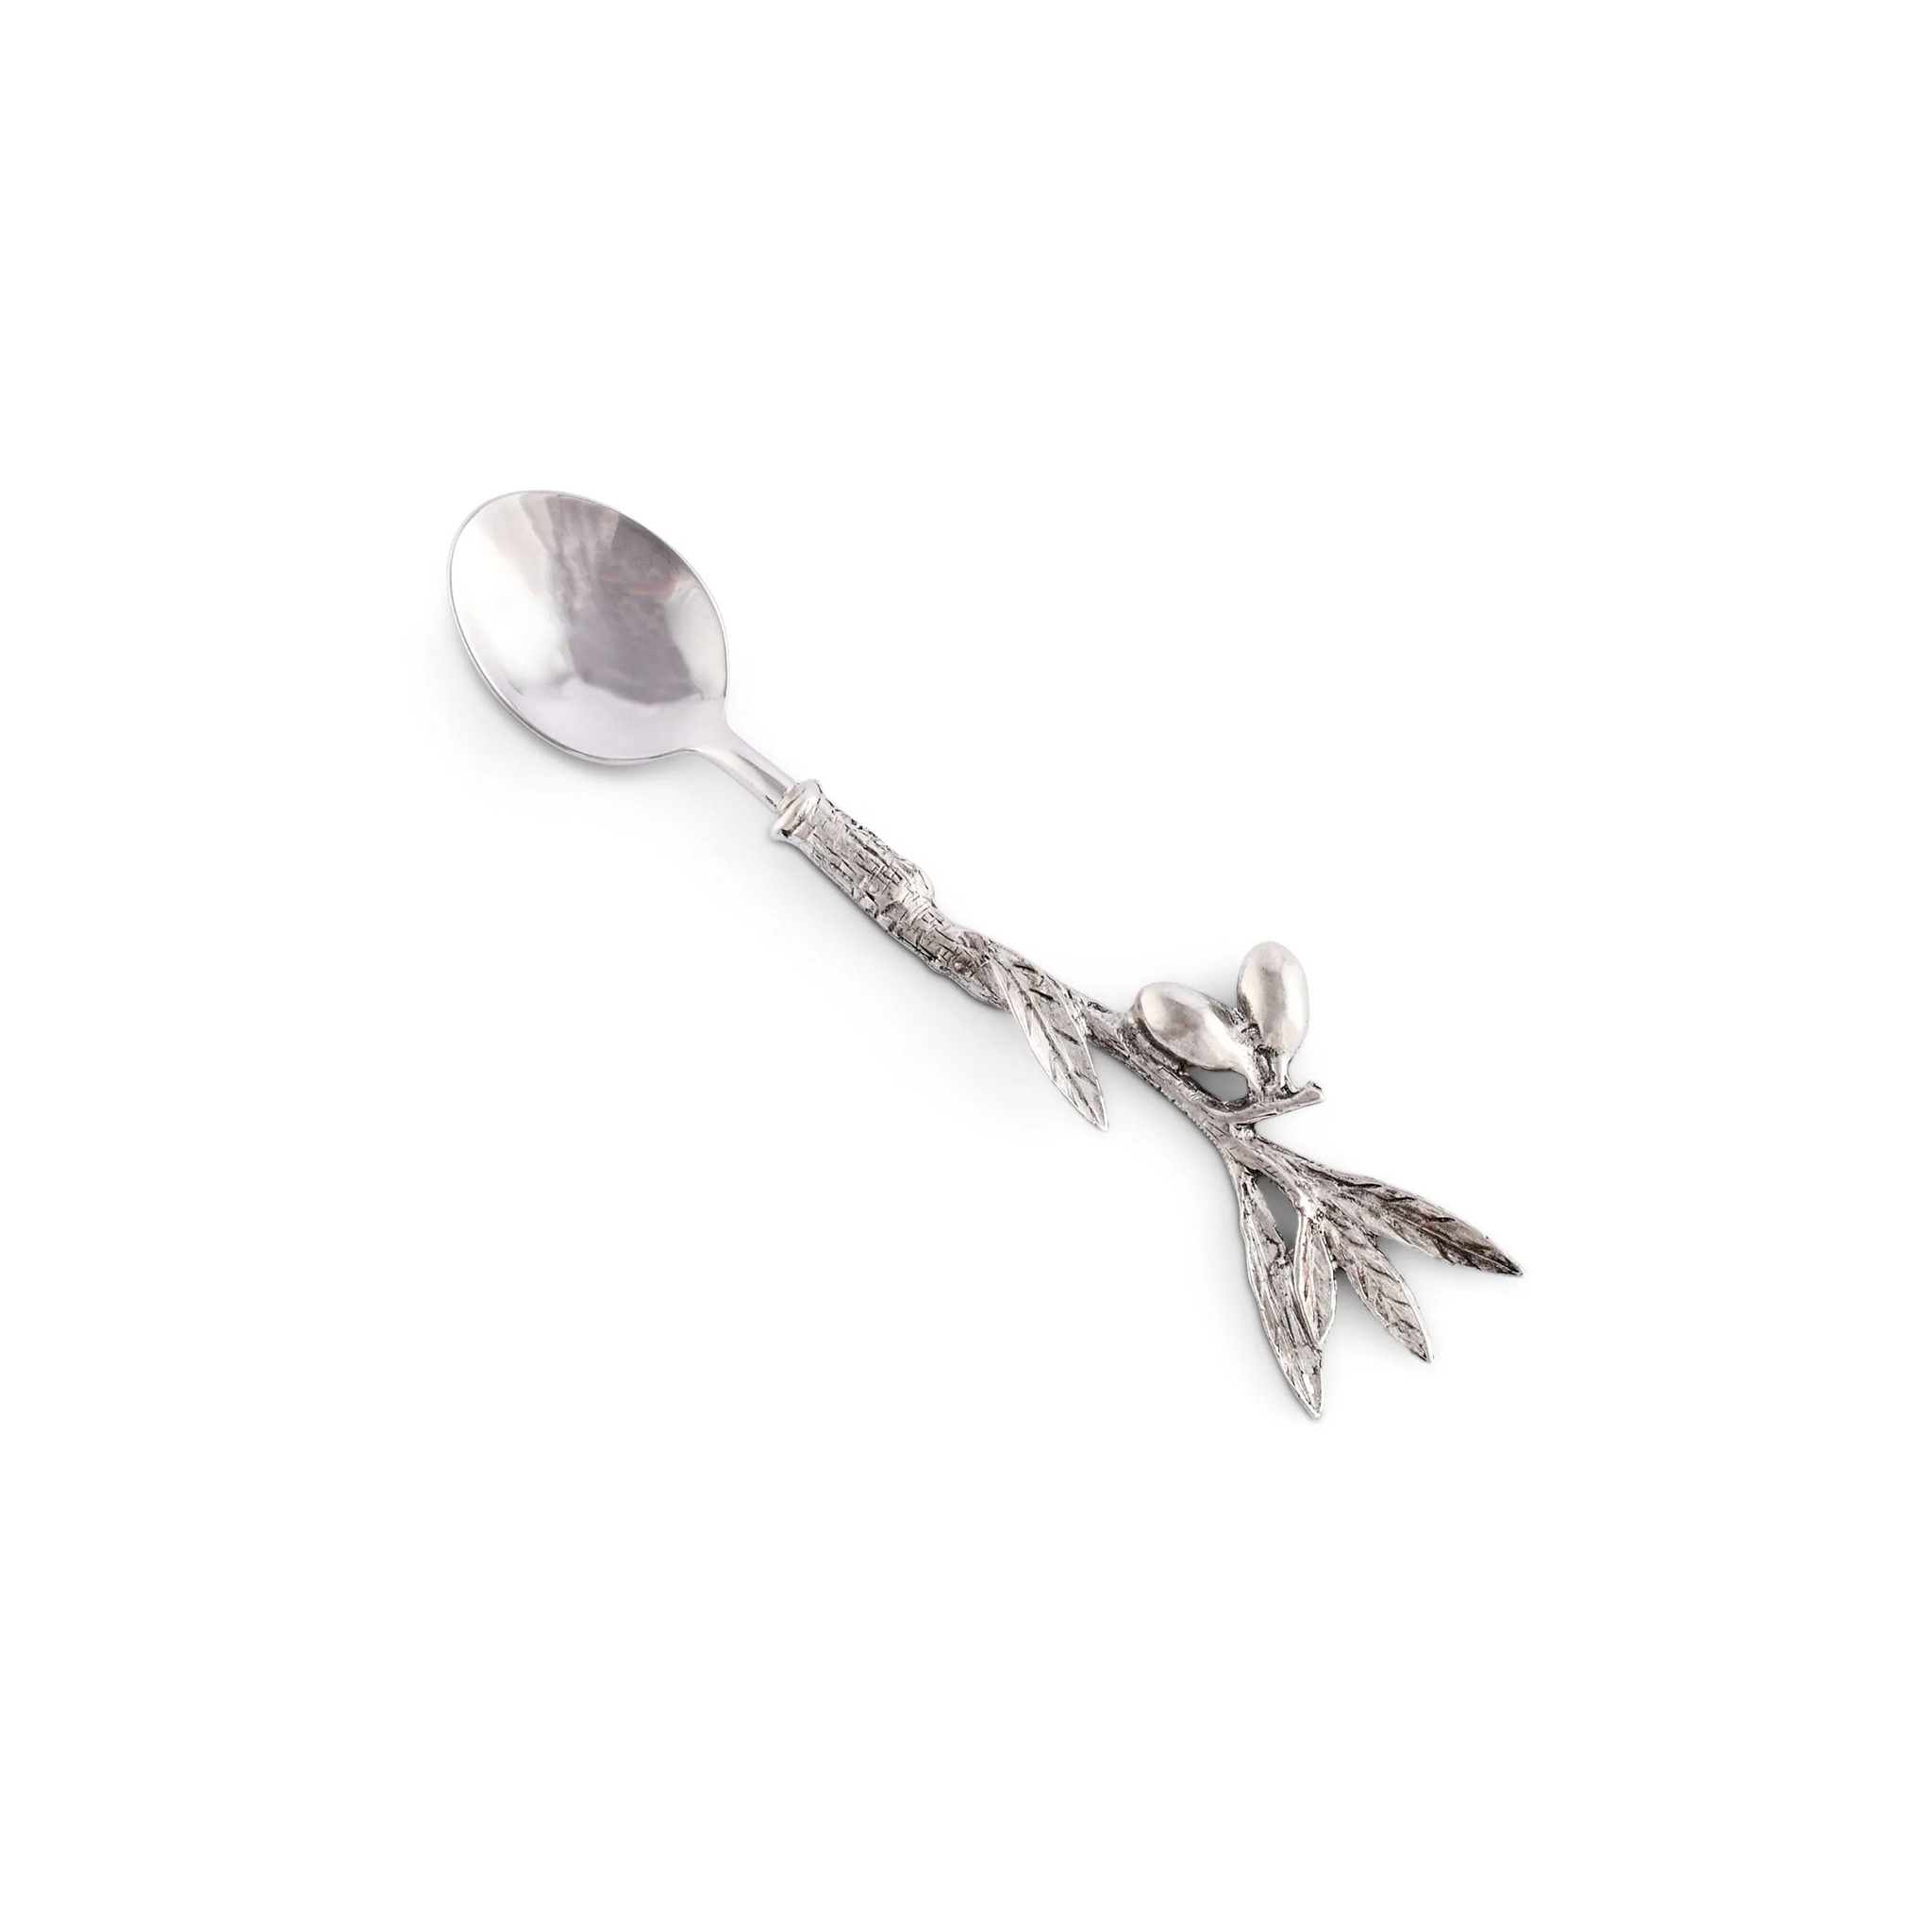 a spoon with a leaf design on it